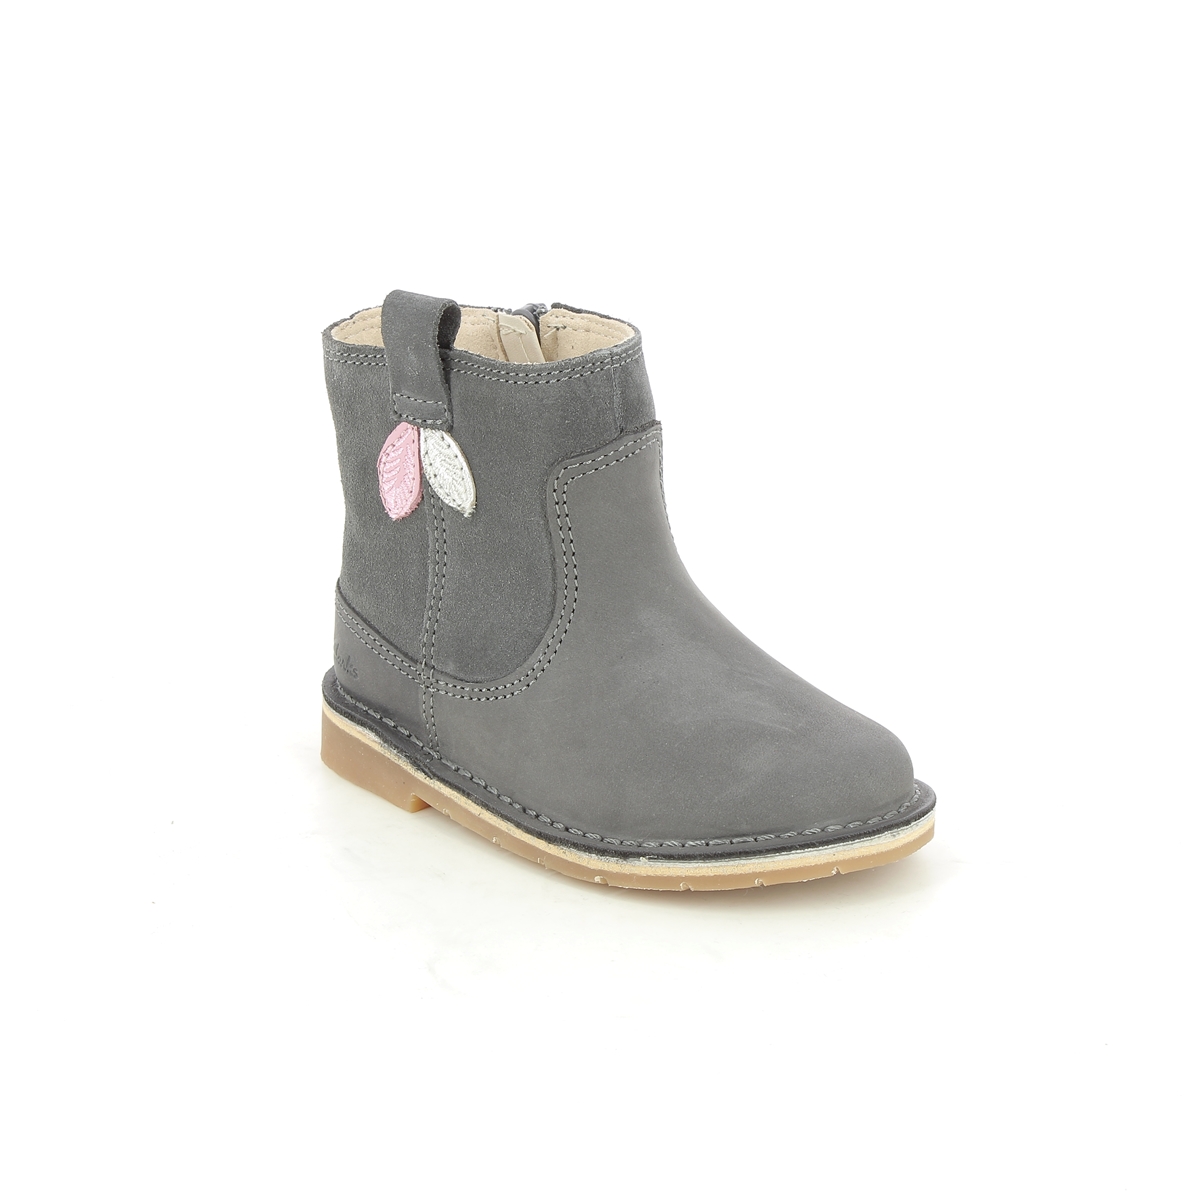 Clarks Comet Style T Grey Leather Kids Toddler Girls Boots 619426F In Size 9 In Plain Grey Leather F Width Fitting Regular Fit For kids